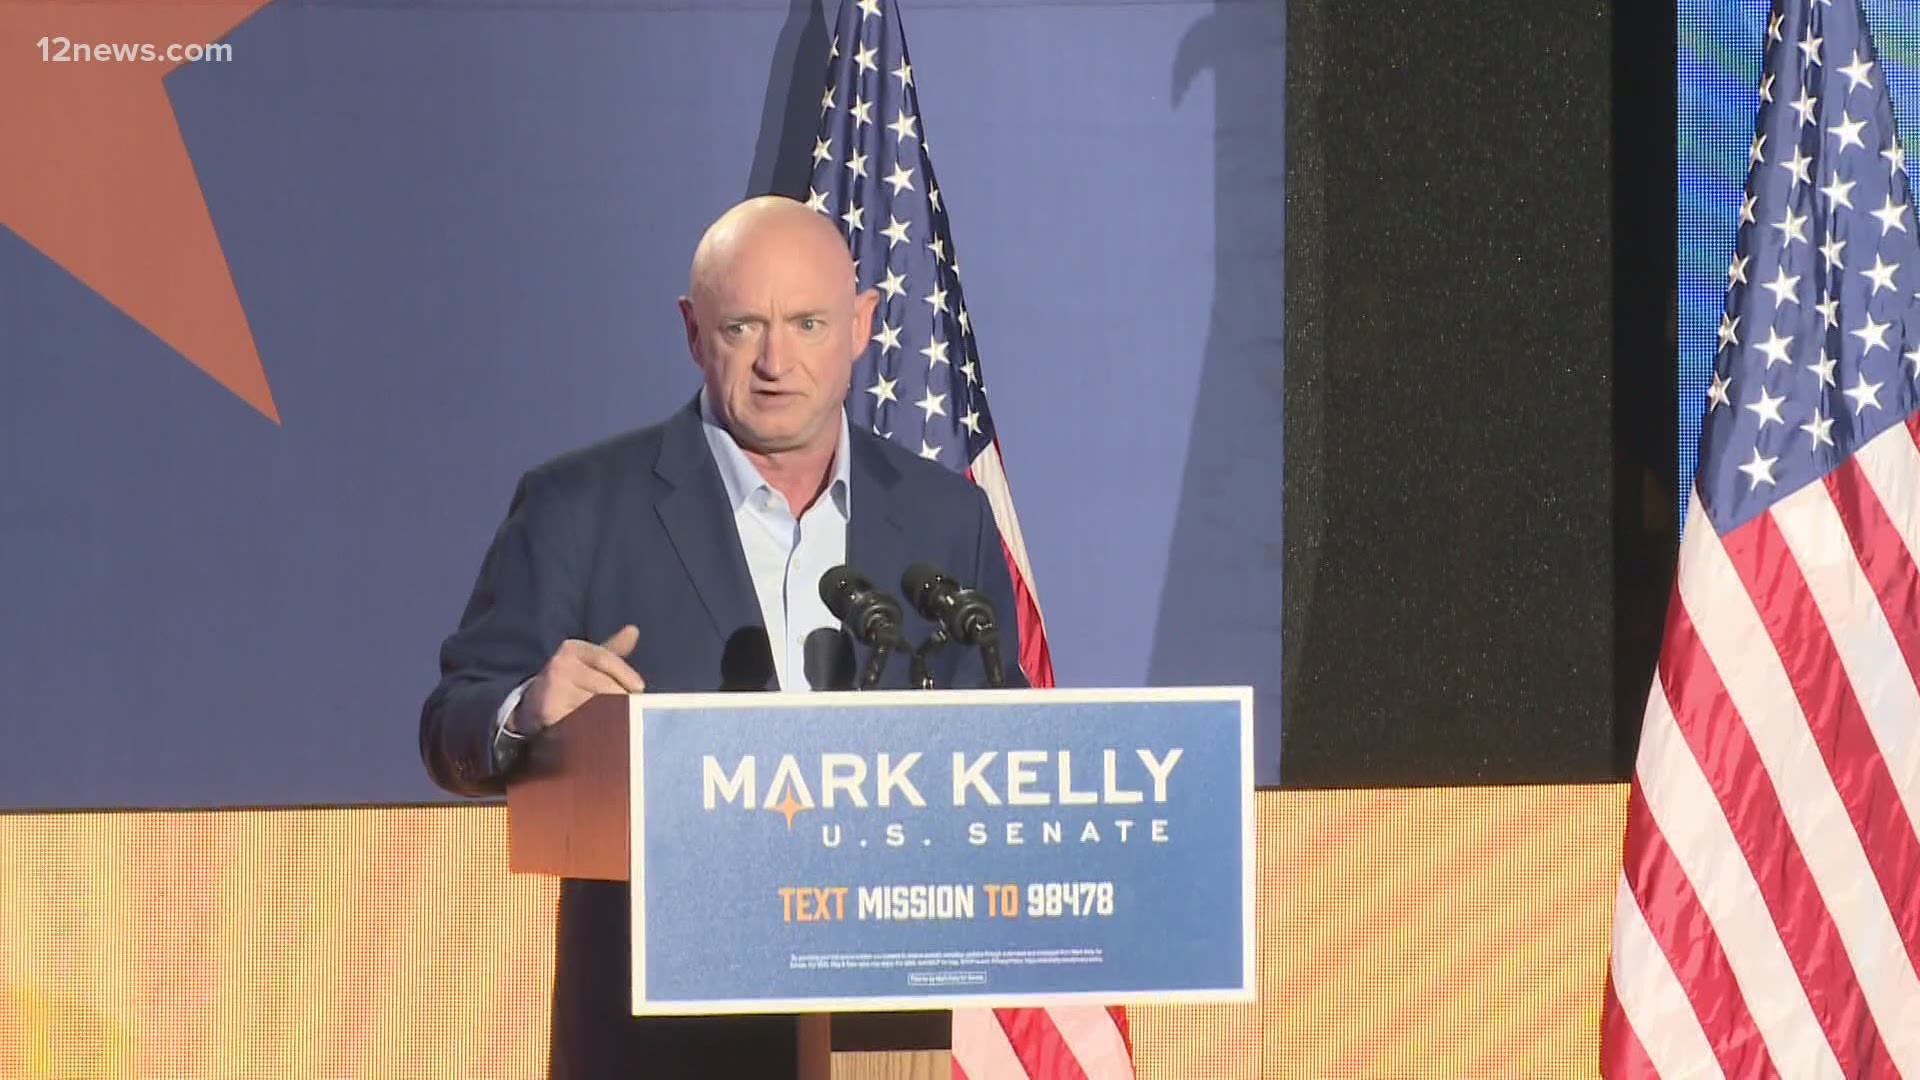 The Associated Press and NBC have called the Senate race in Arizona in favor of Mark Kelly. Martha McSally's campaign has not yet conceded, however.